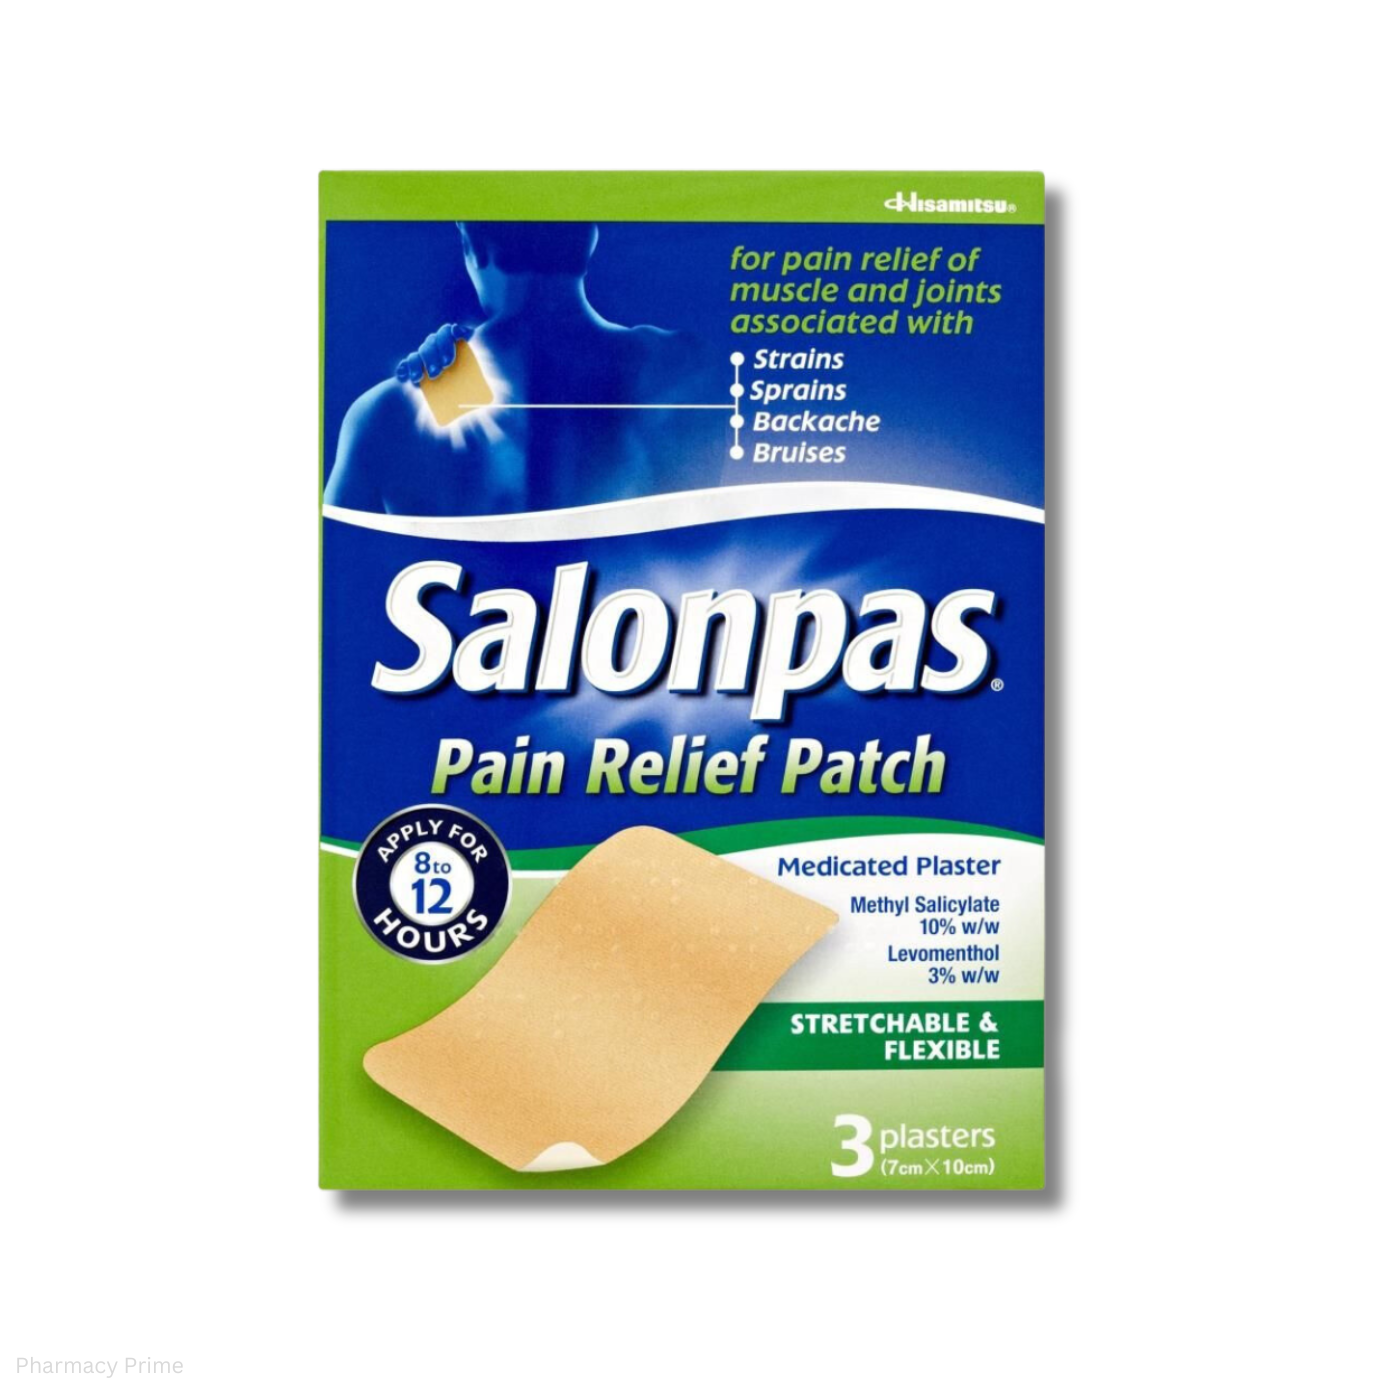 Salonpas Pain Relief Patch - 3 pack - Medicated Plaster for Joint & Muscle Pain